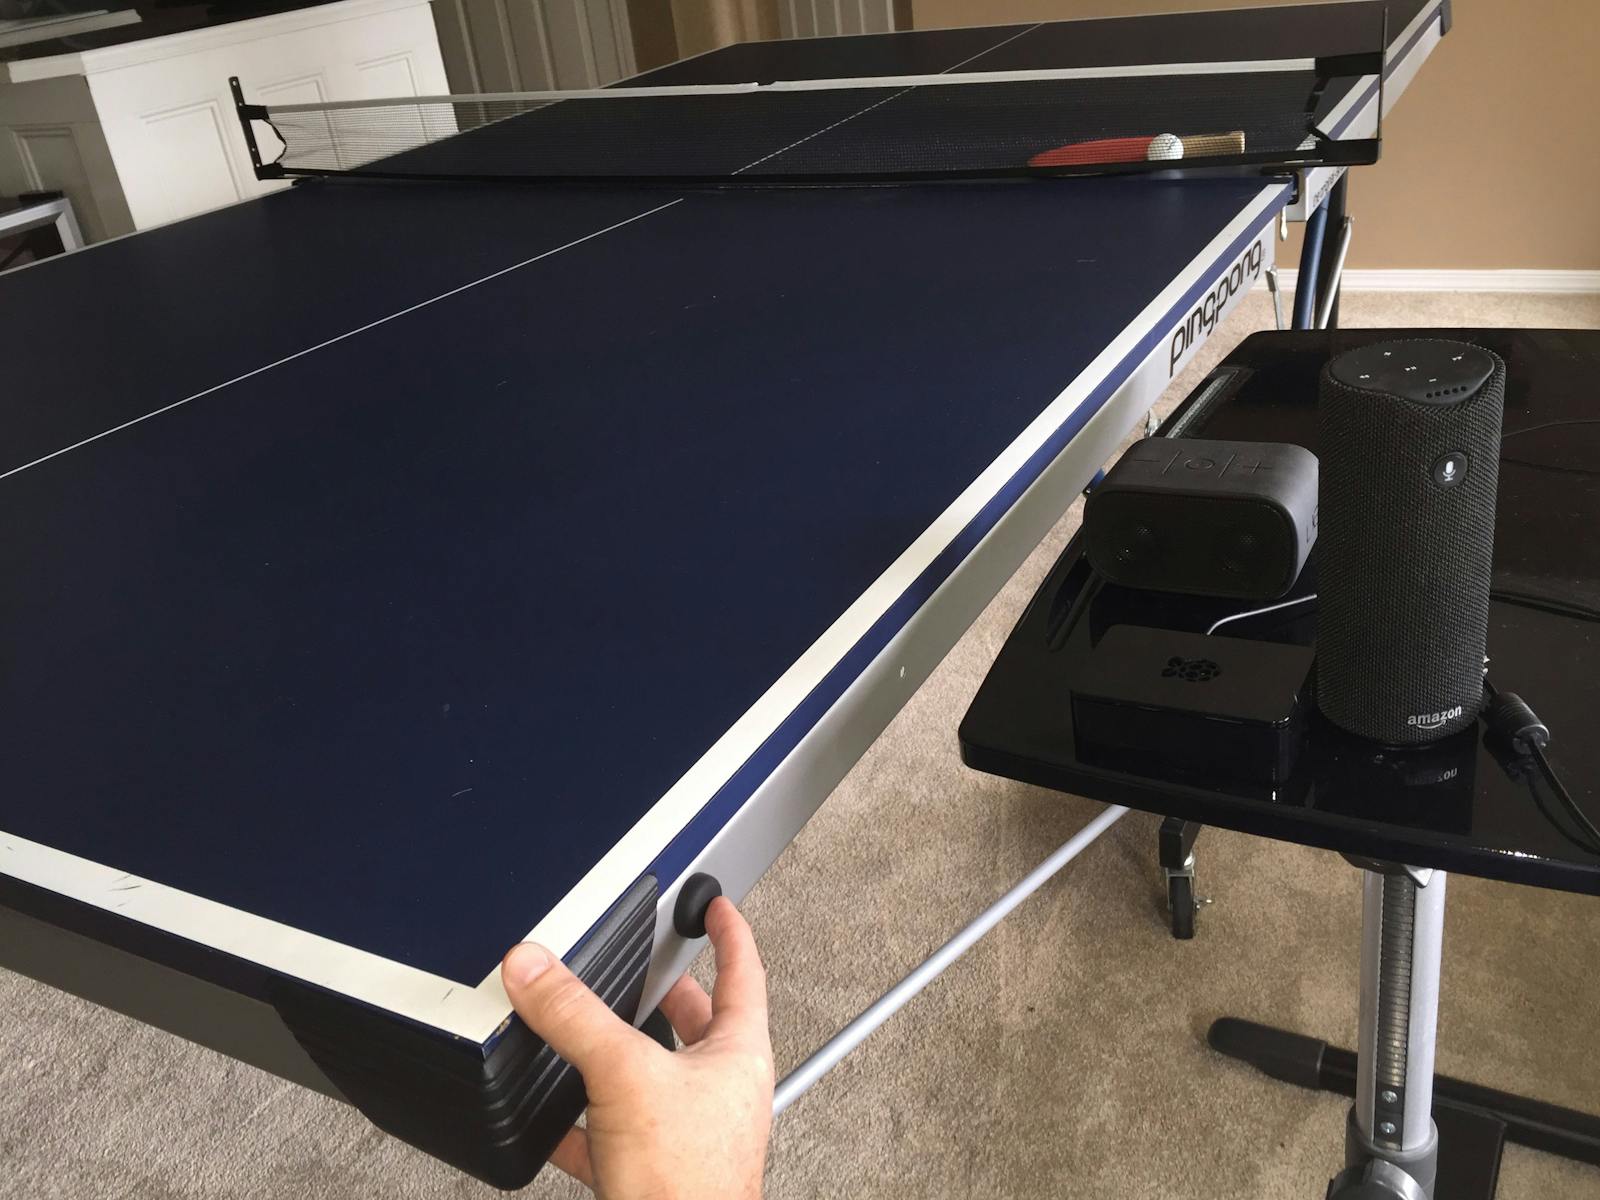 Create the fun ping pong game with the use of HTML and JAVA